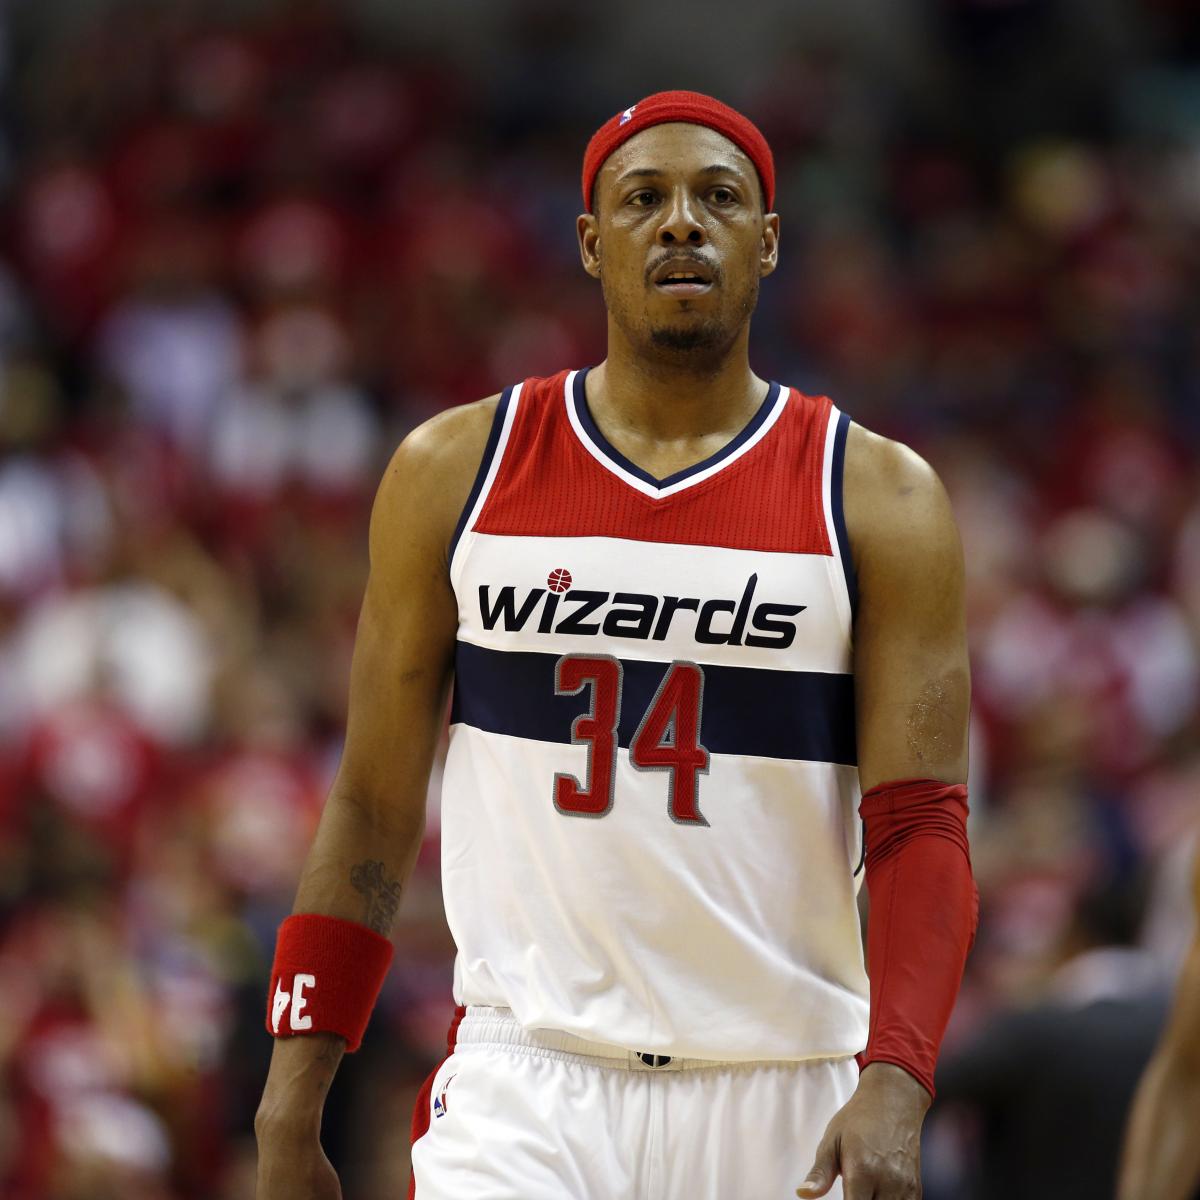 Paul Pierce explains how he ended up on the Washington Wizards